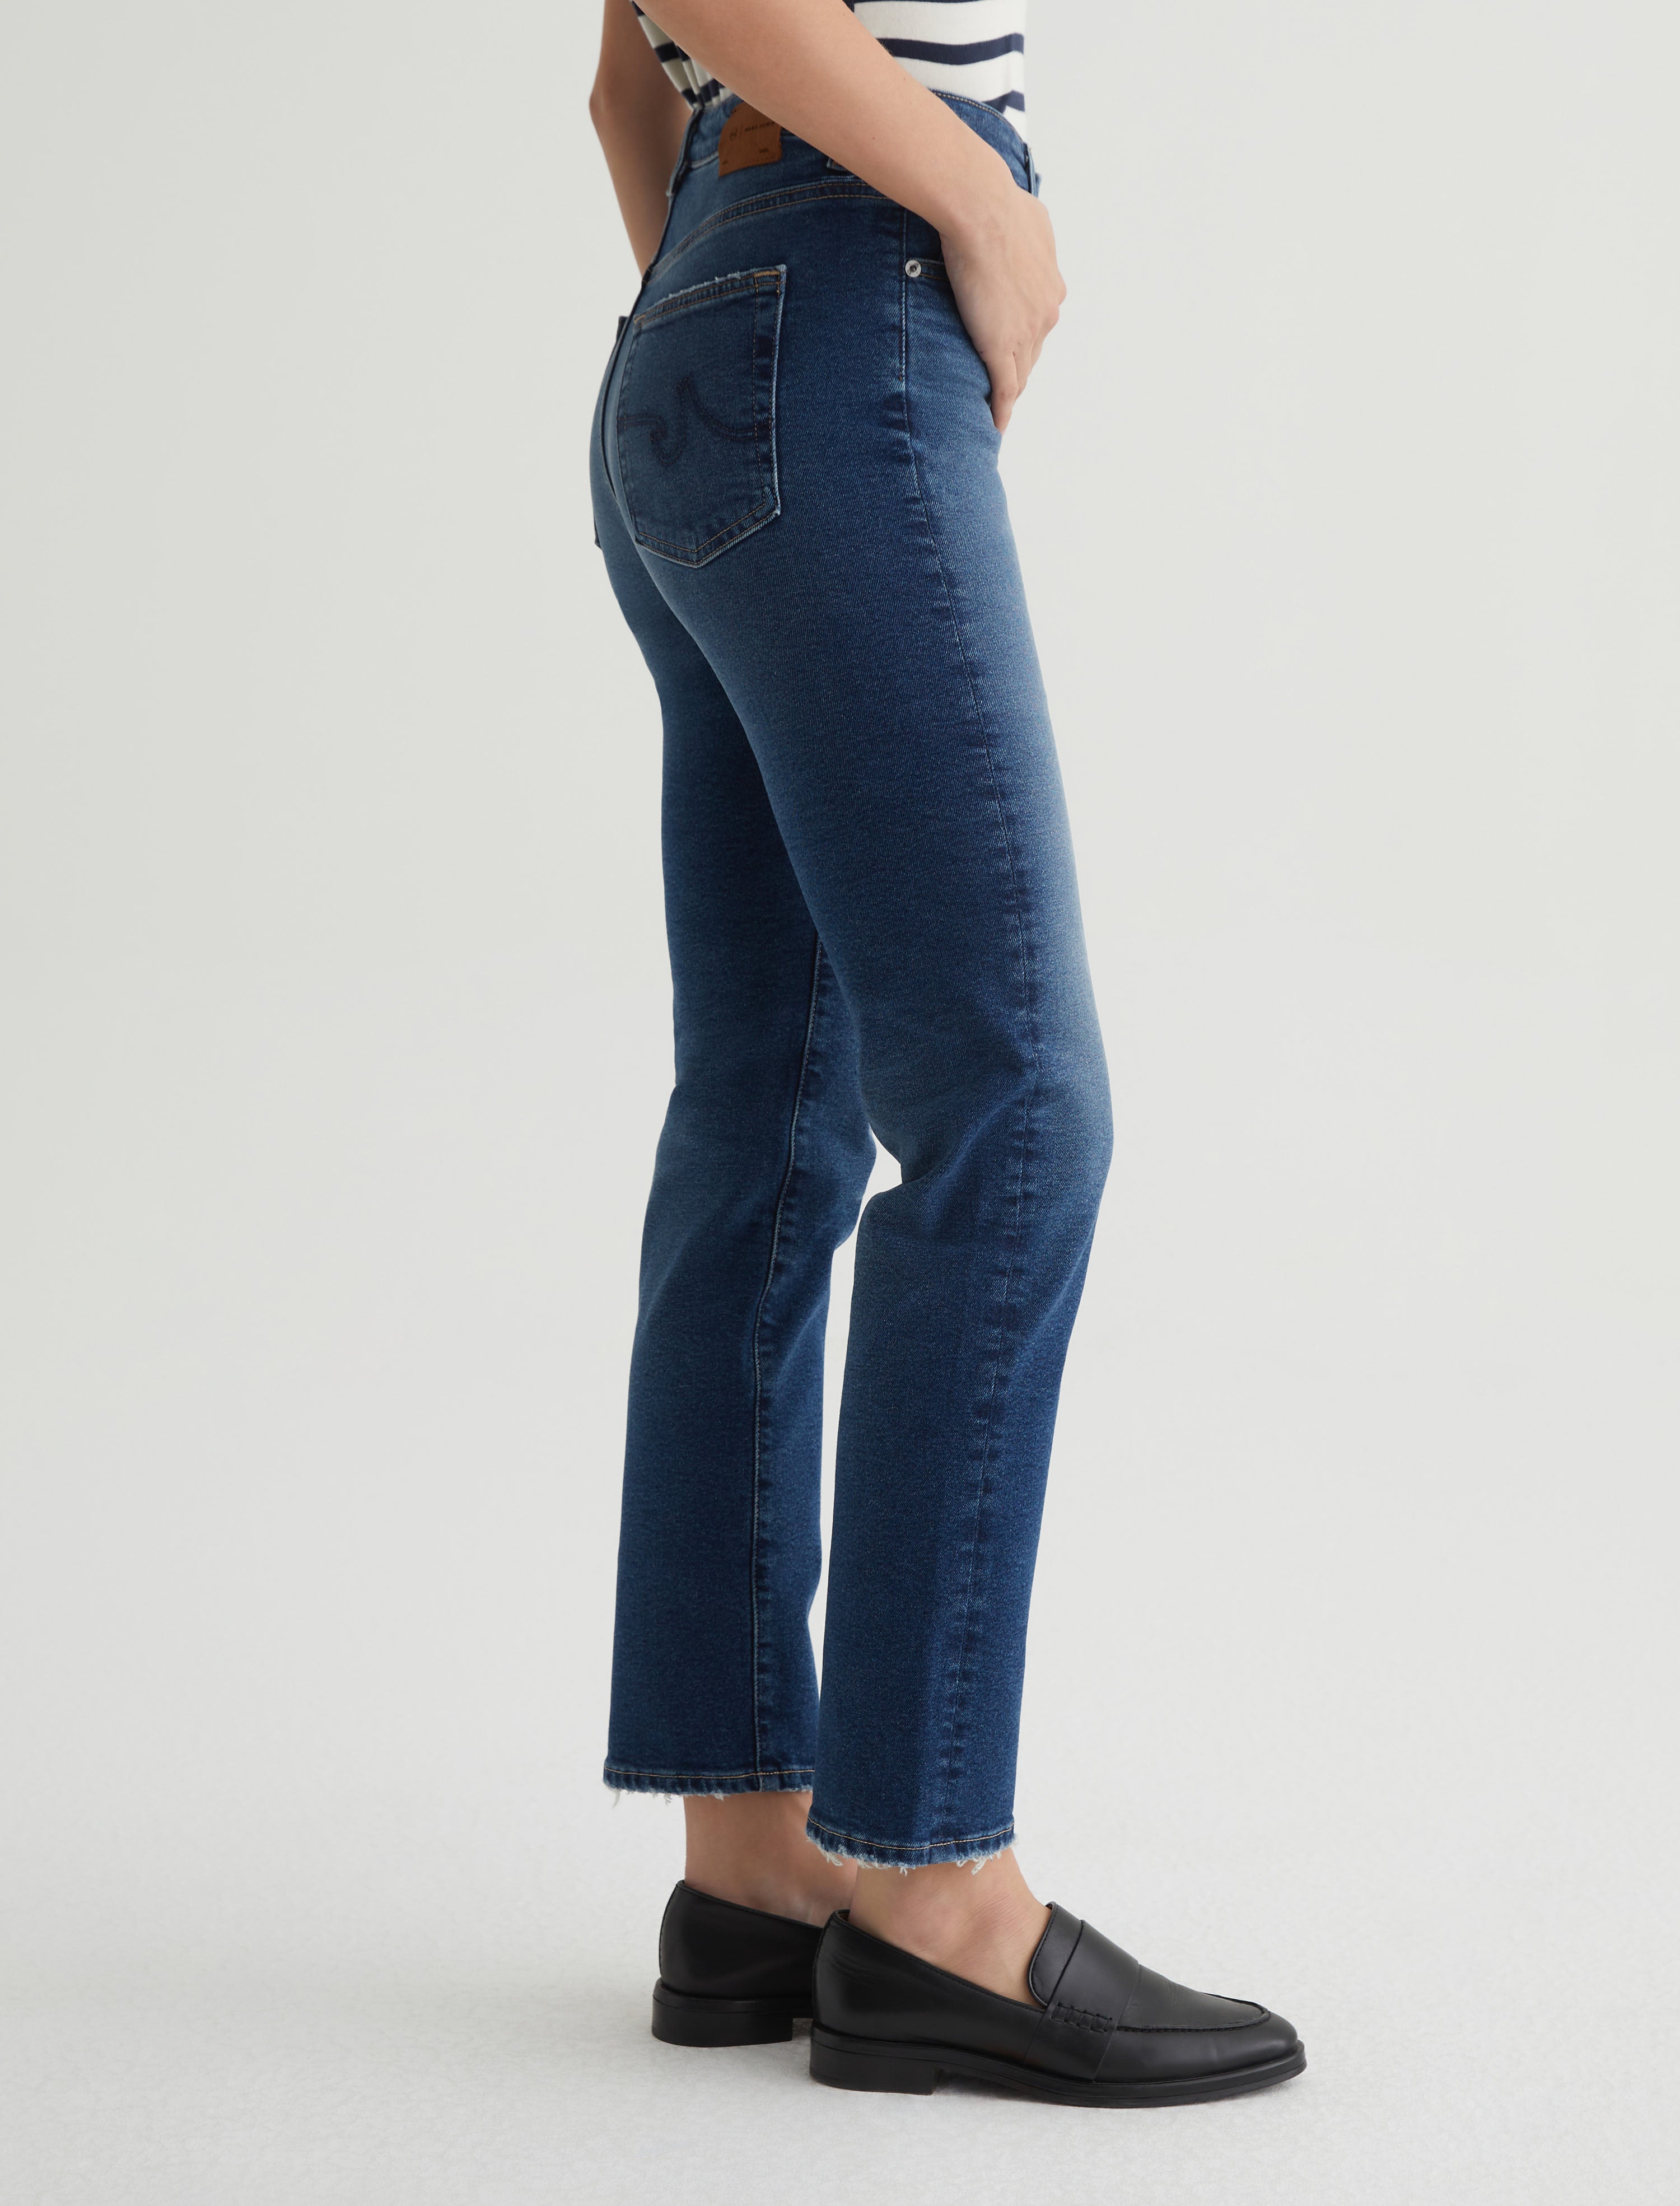 Womens Saige Cosmopolitan at AG Jeans Official Store